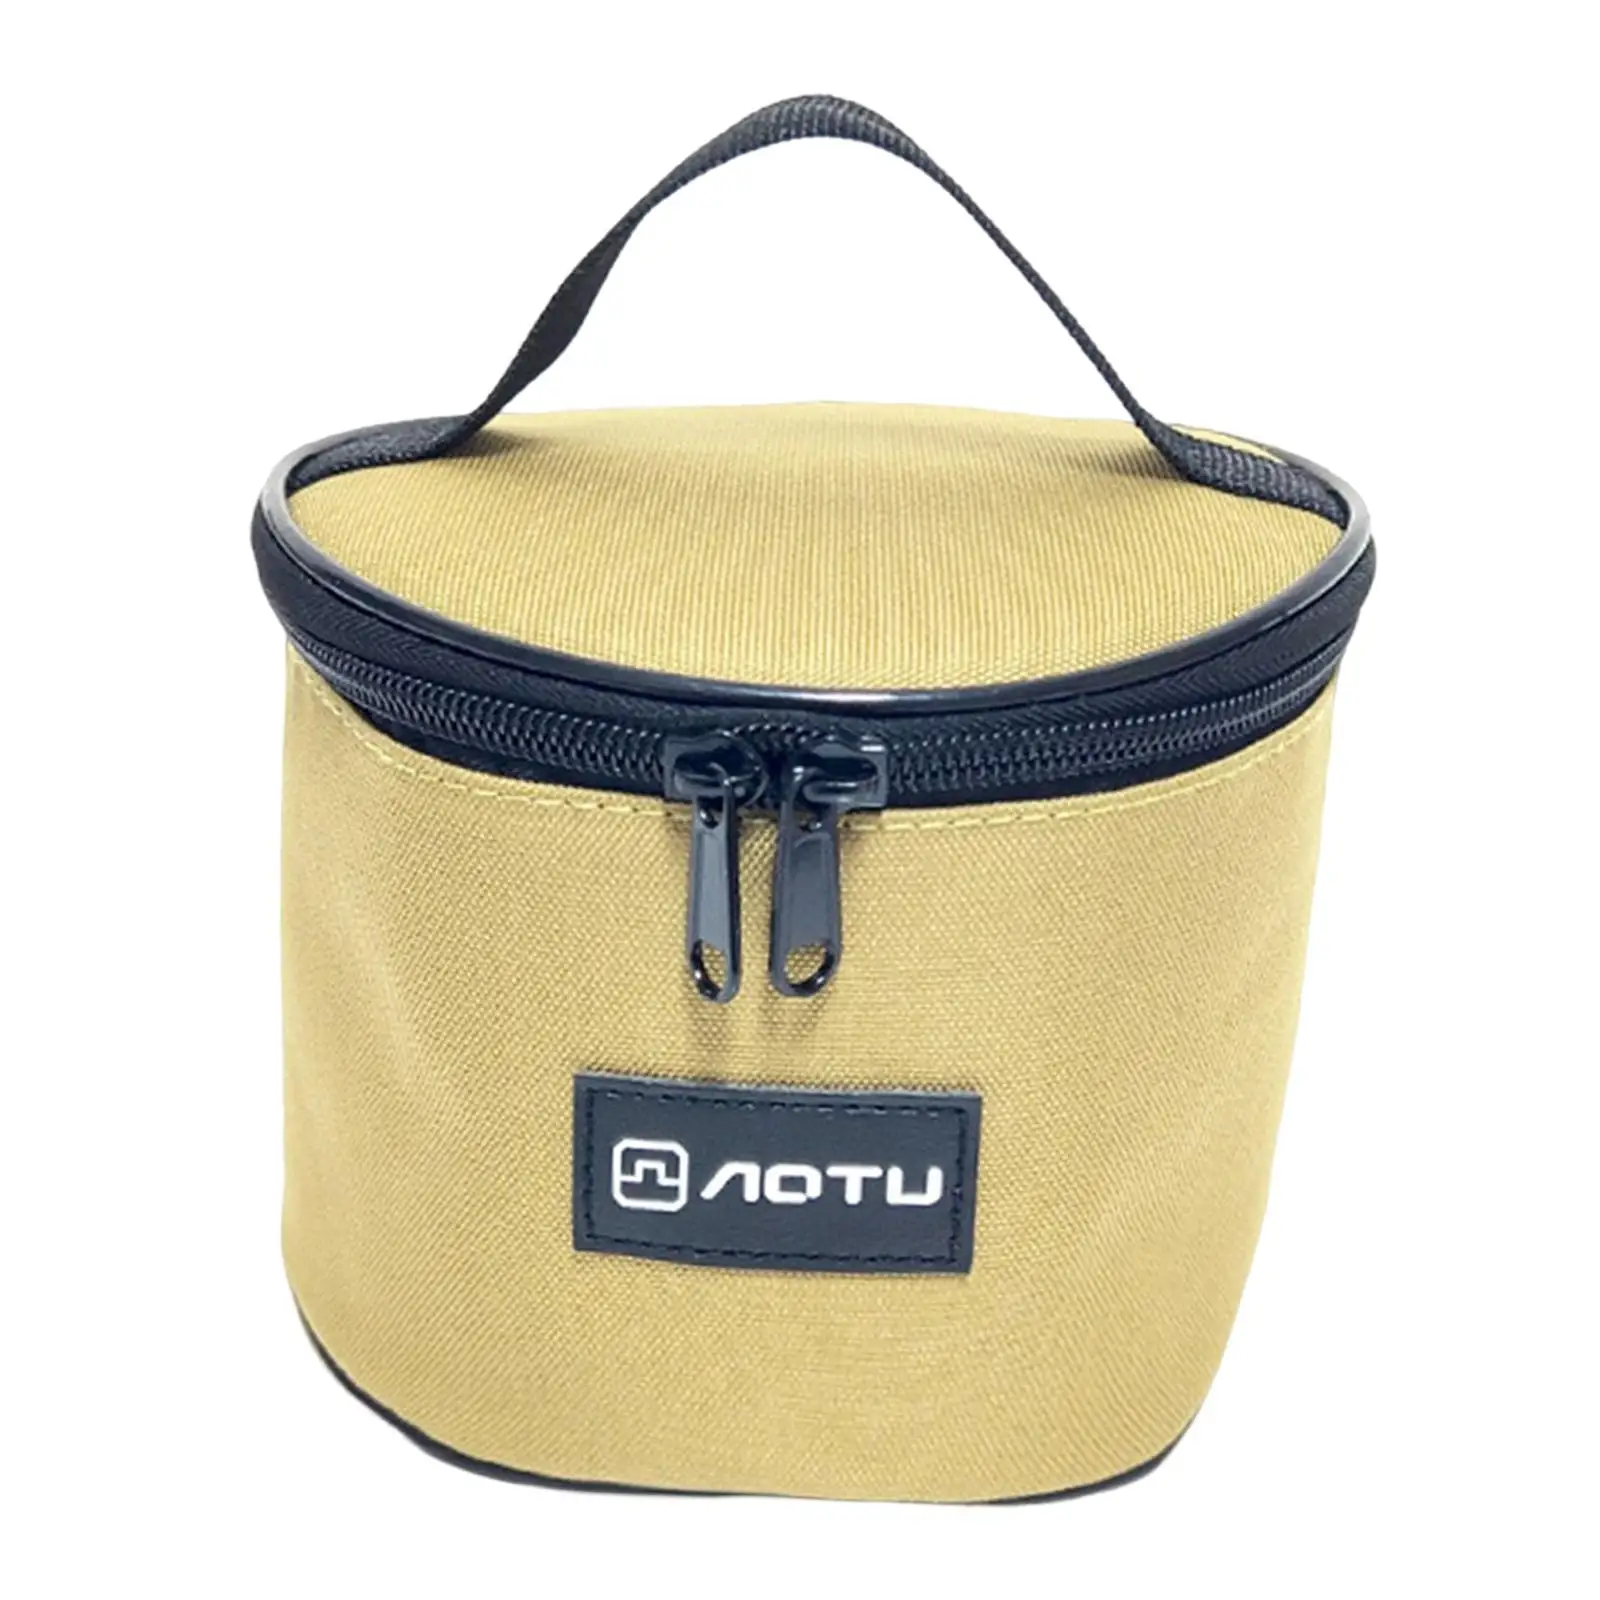 Portable Bowl Storage Bag Activities Waterproof Tableware Hanging Organizer Camping Pouch for Travel Picnic Dinnerware Fishing